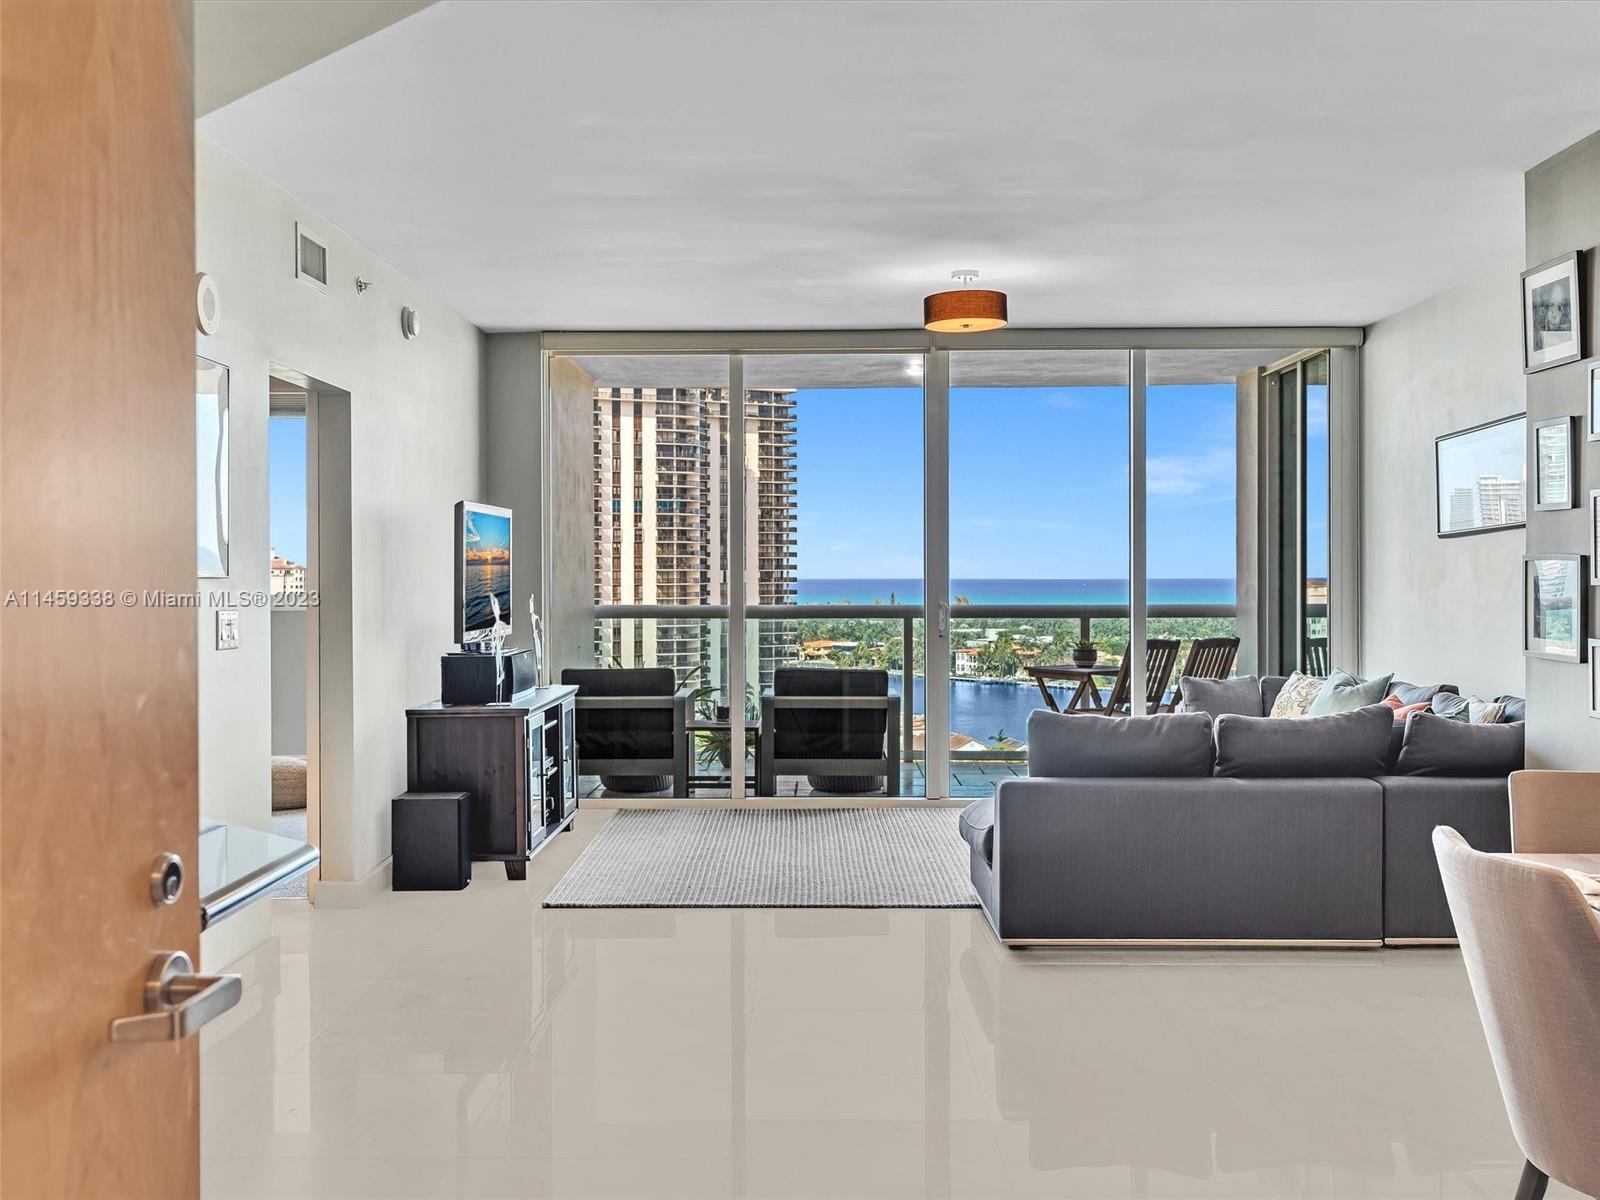 WAKE UP TO THE MOST STUNNING OCEAN VIEWS! THIS BOUTIQUE LUXURY BUILDING IS IN THE HEART OF AVENTURA.